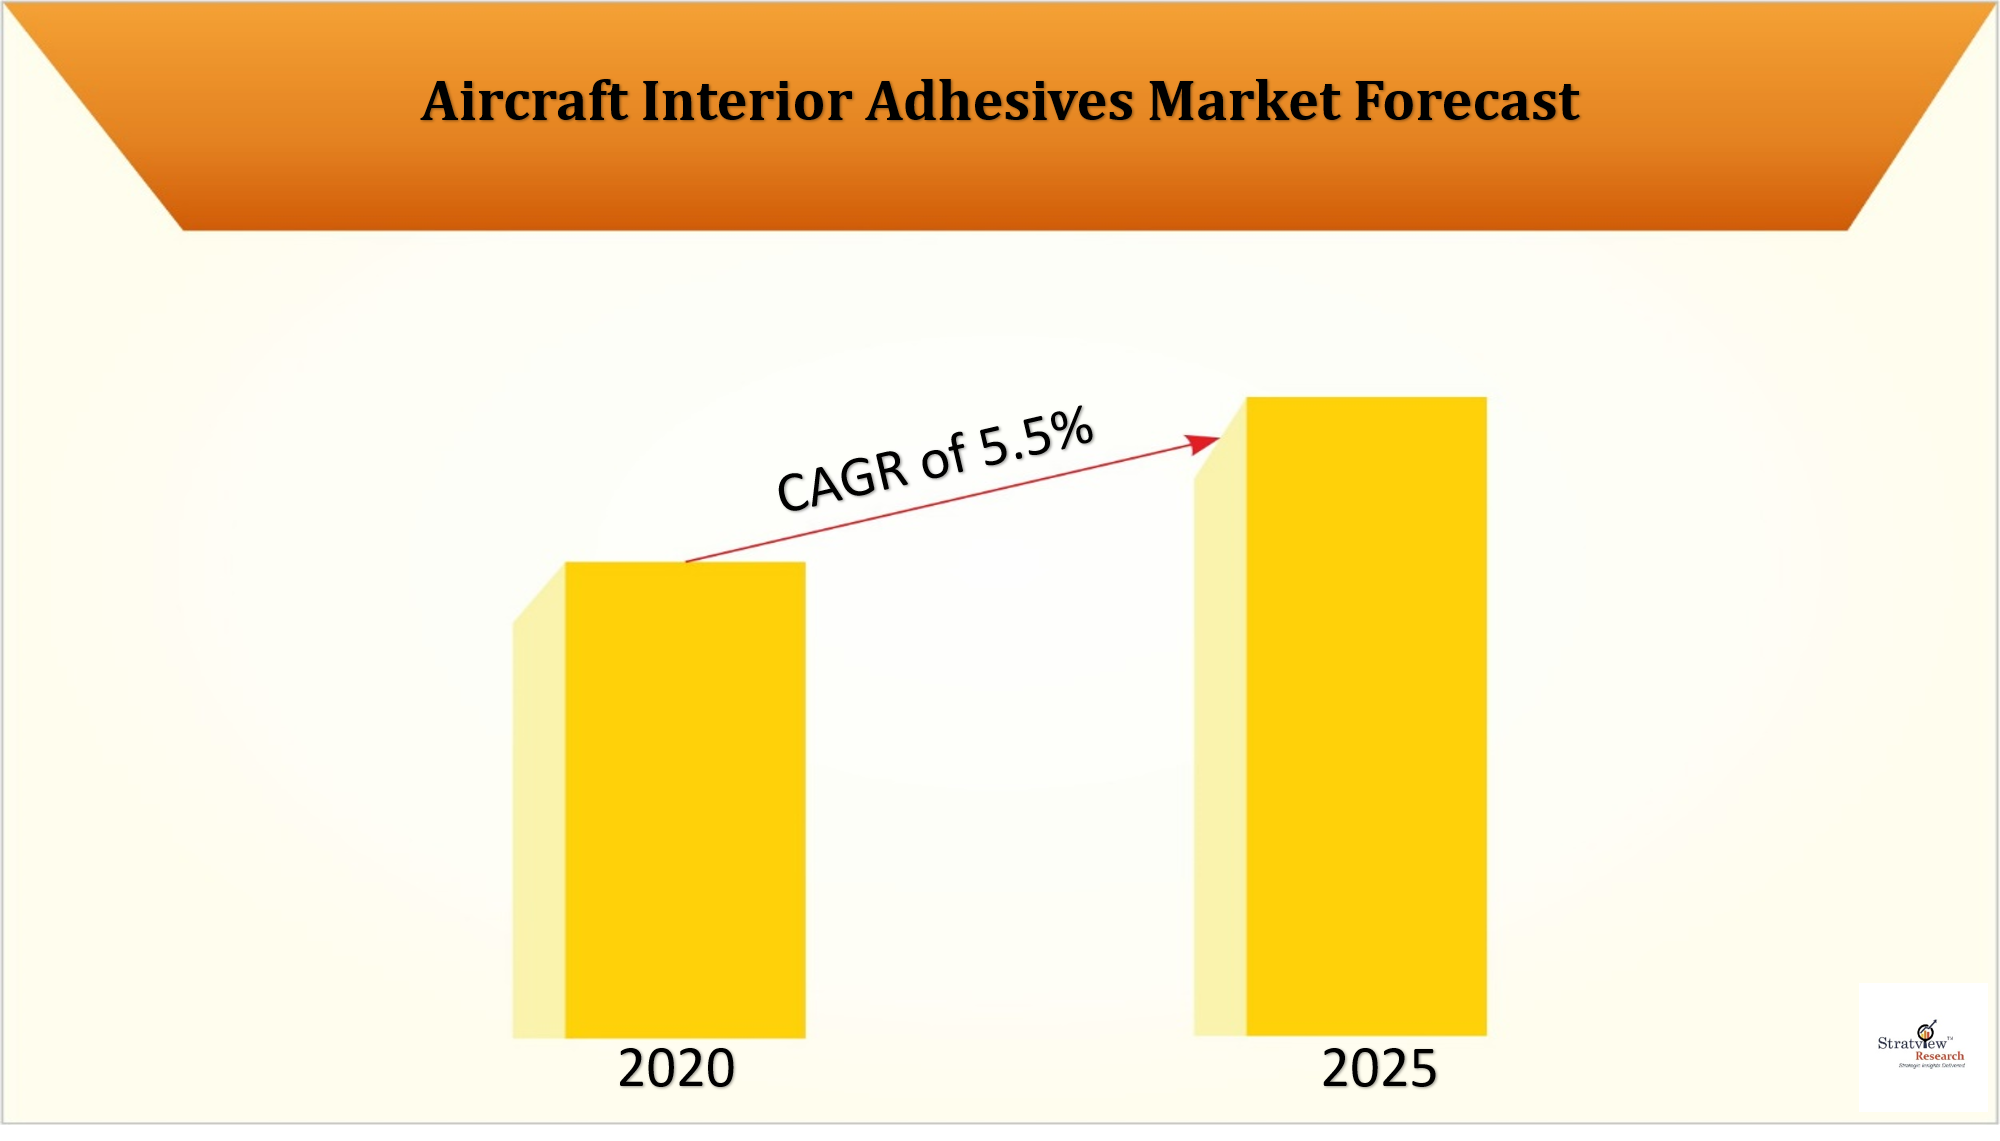 Aerospace Interior Adhesives Market to offer a healthy CAGR of 5.5% during 2020-25